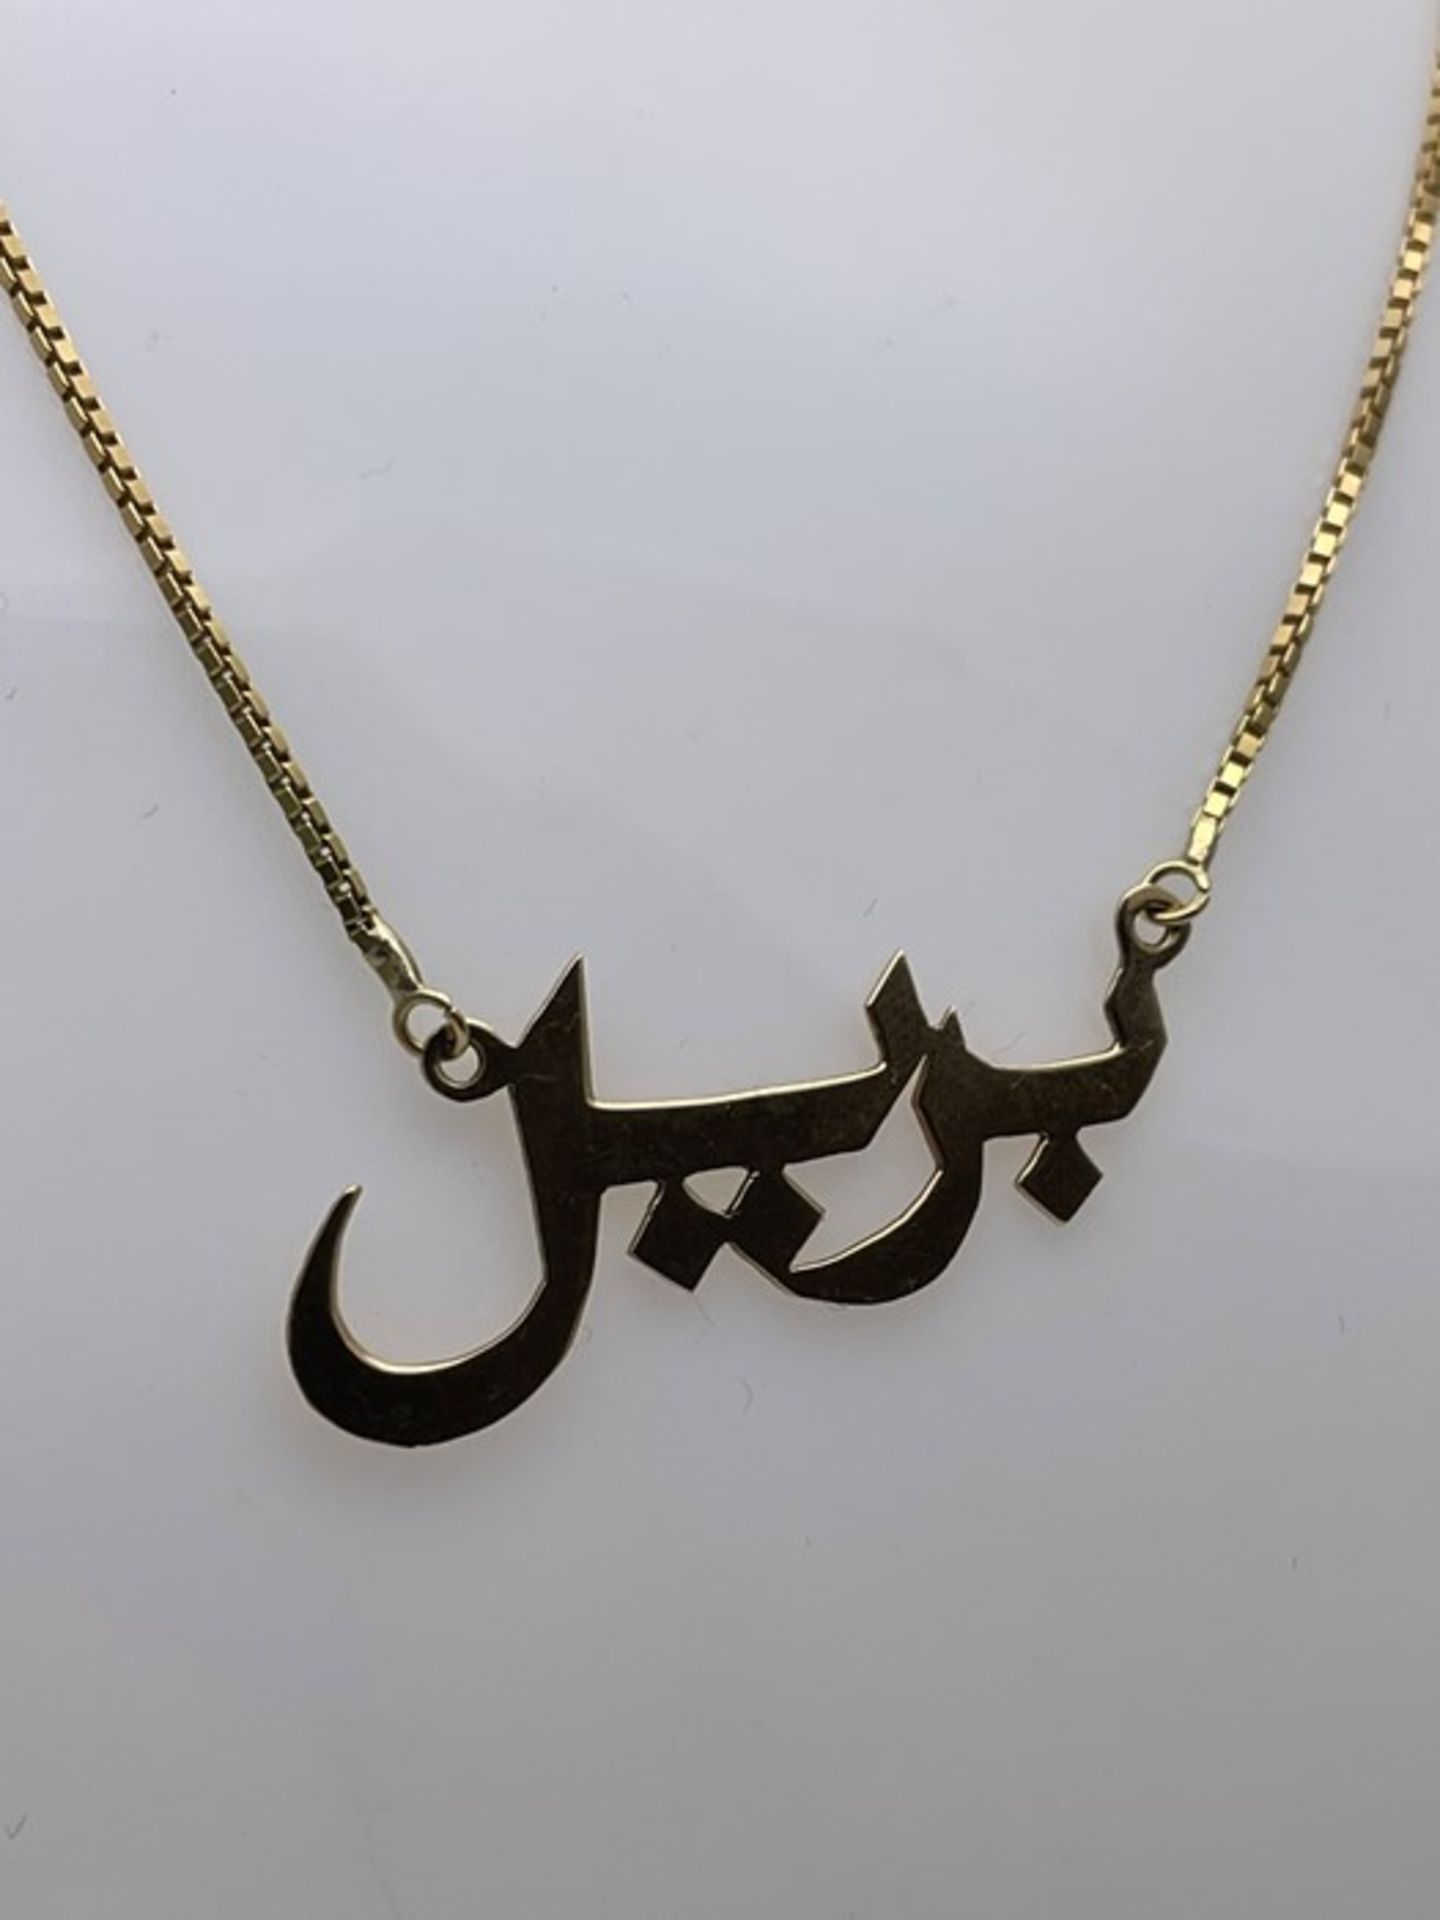 18CT YELLOW GOLD NECKLACE WITH ISLAMIC STYLE PENDENT (910) - Image 2 of 2